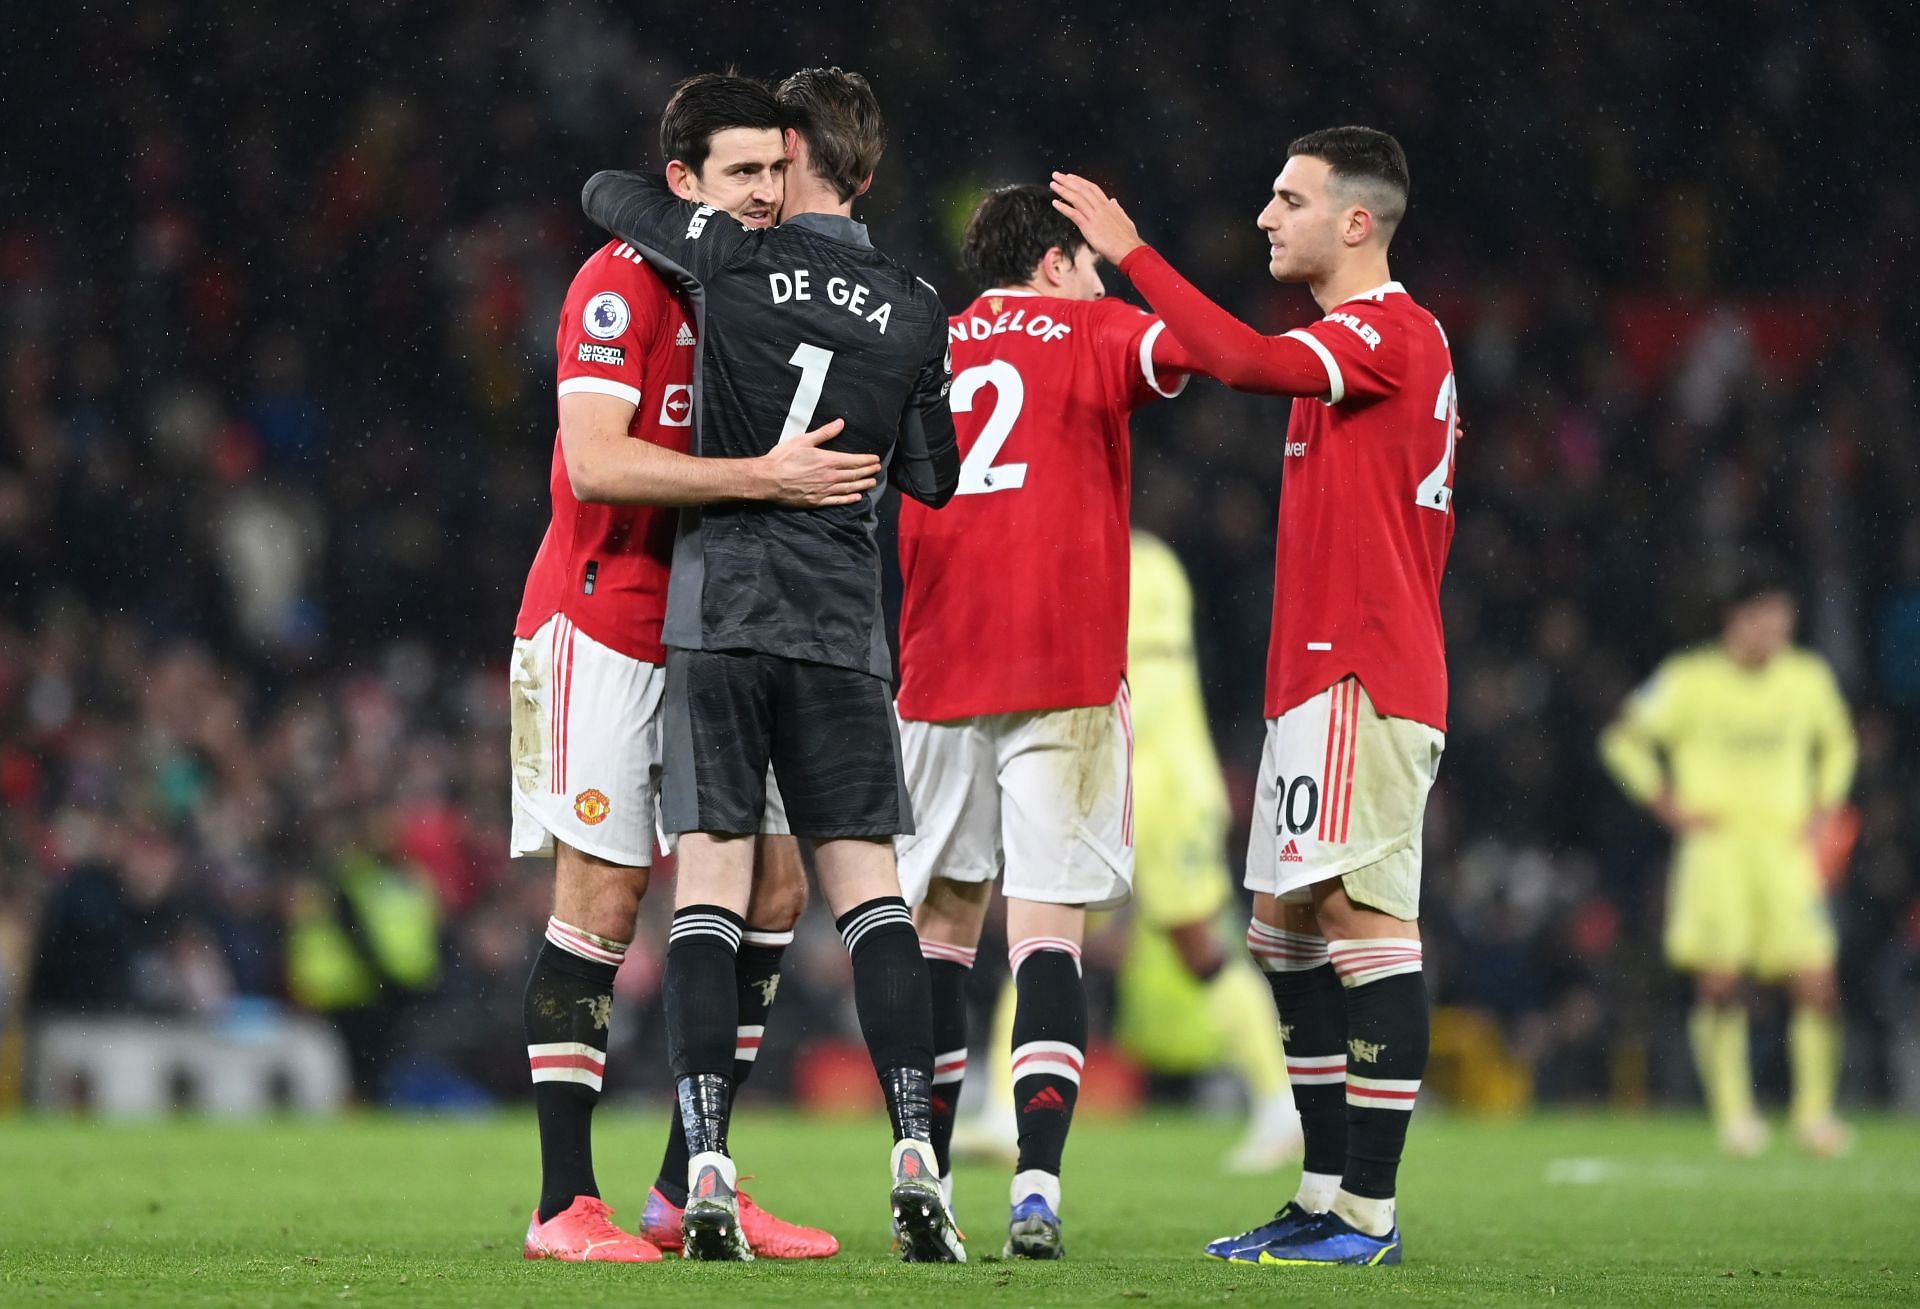  Under Ralf Rangnick, Manchester United earned a vital 3-2 victory over Arsenal in the Premier League on Thursday night